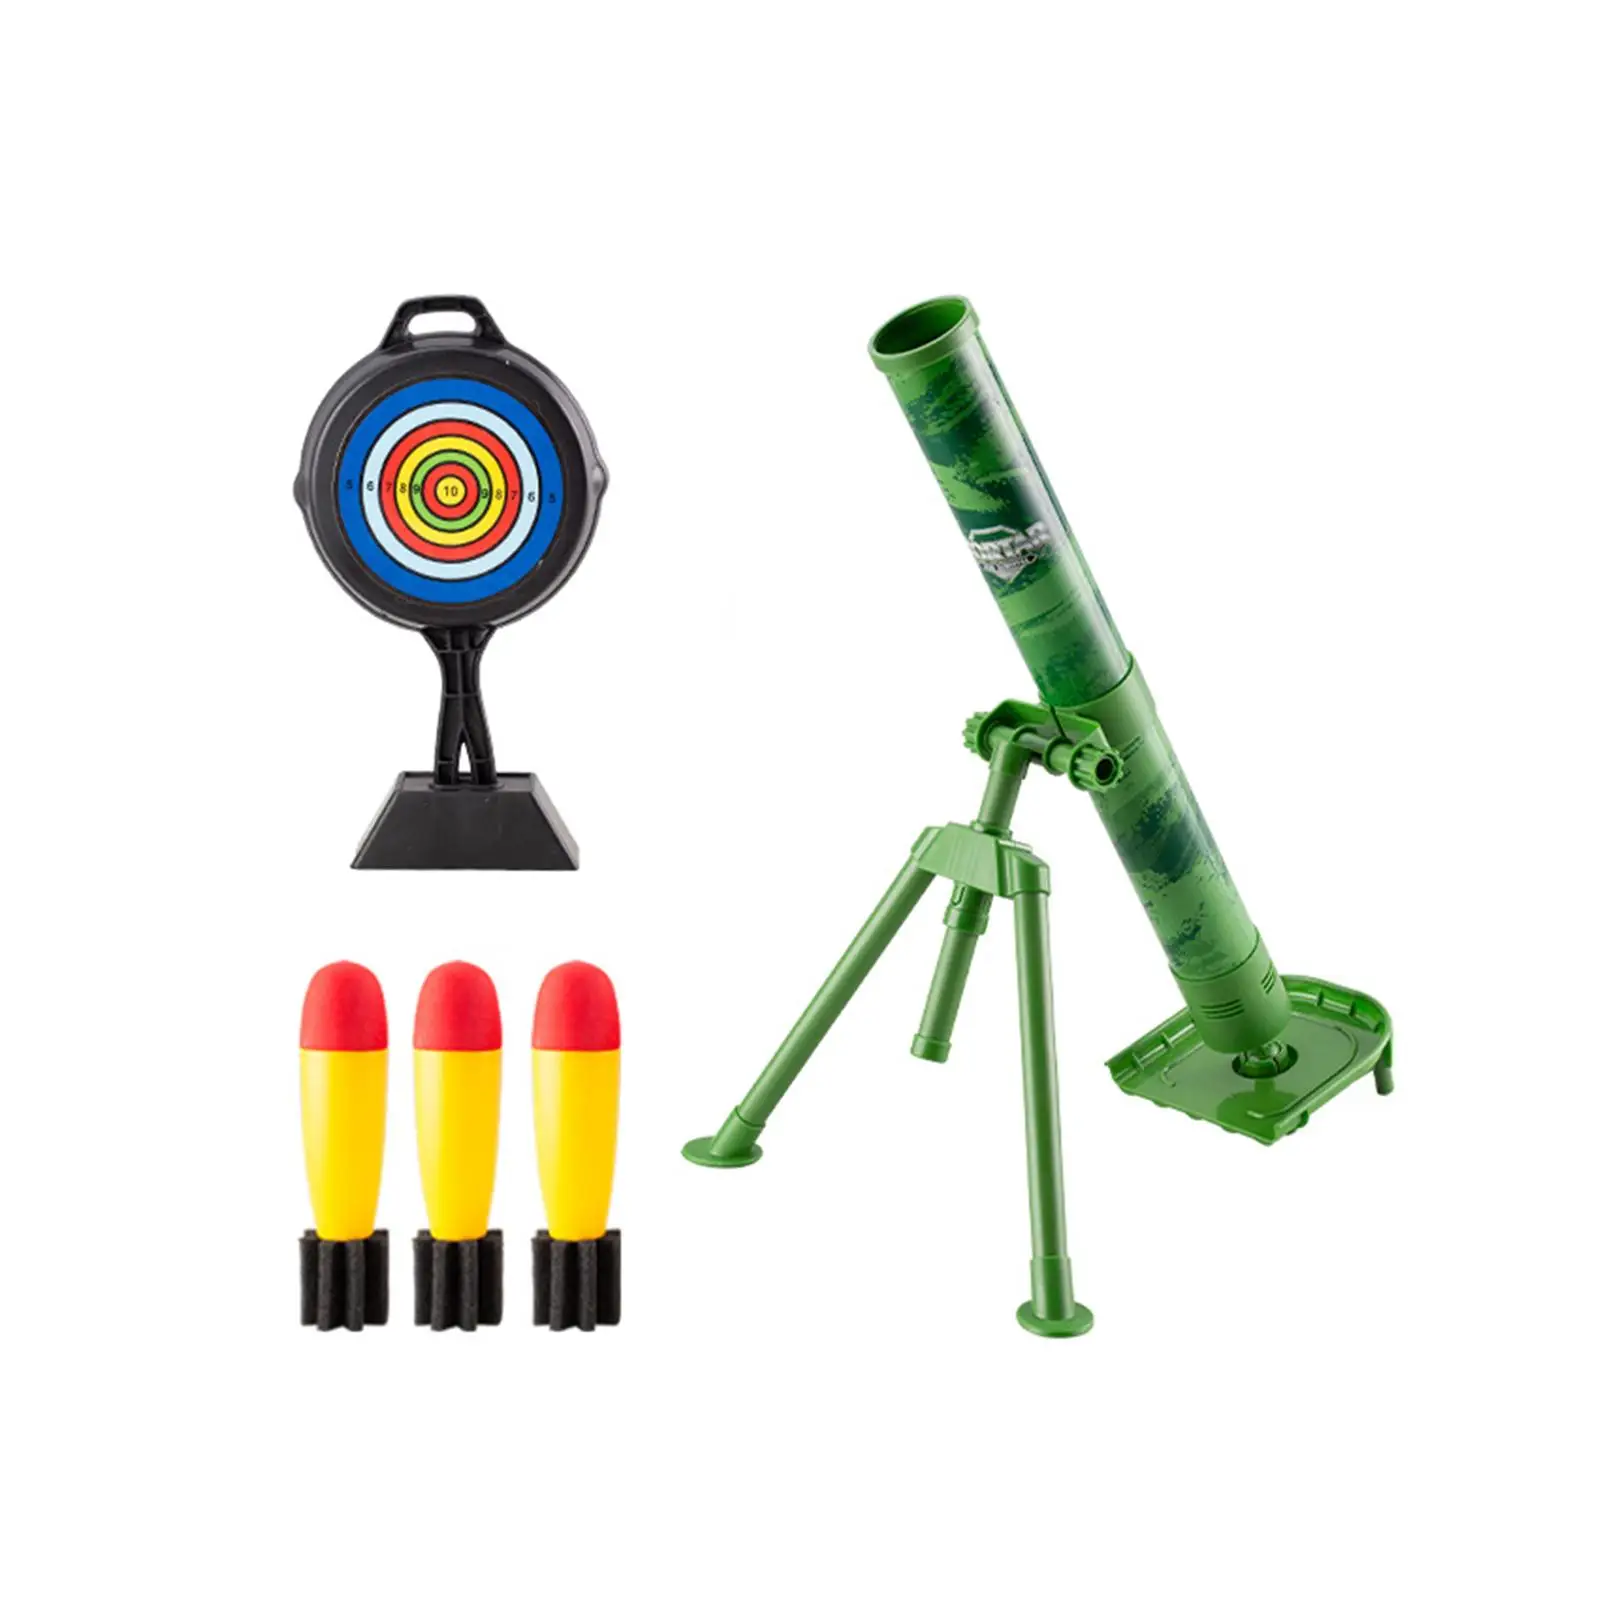 Mortar Launcher Toy Set with 3 Safety Foam Shells Play Game Kits Rocket Launcher for Boys and Girls Kid Festival Gifts